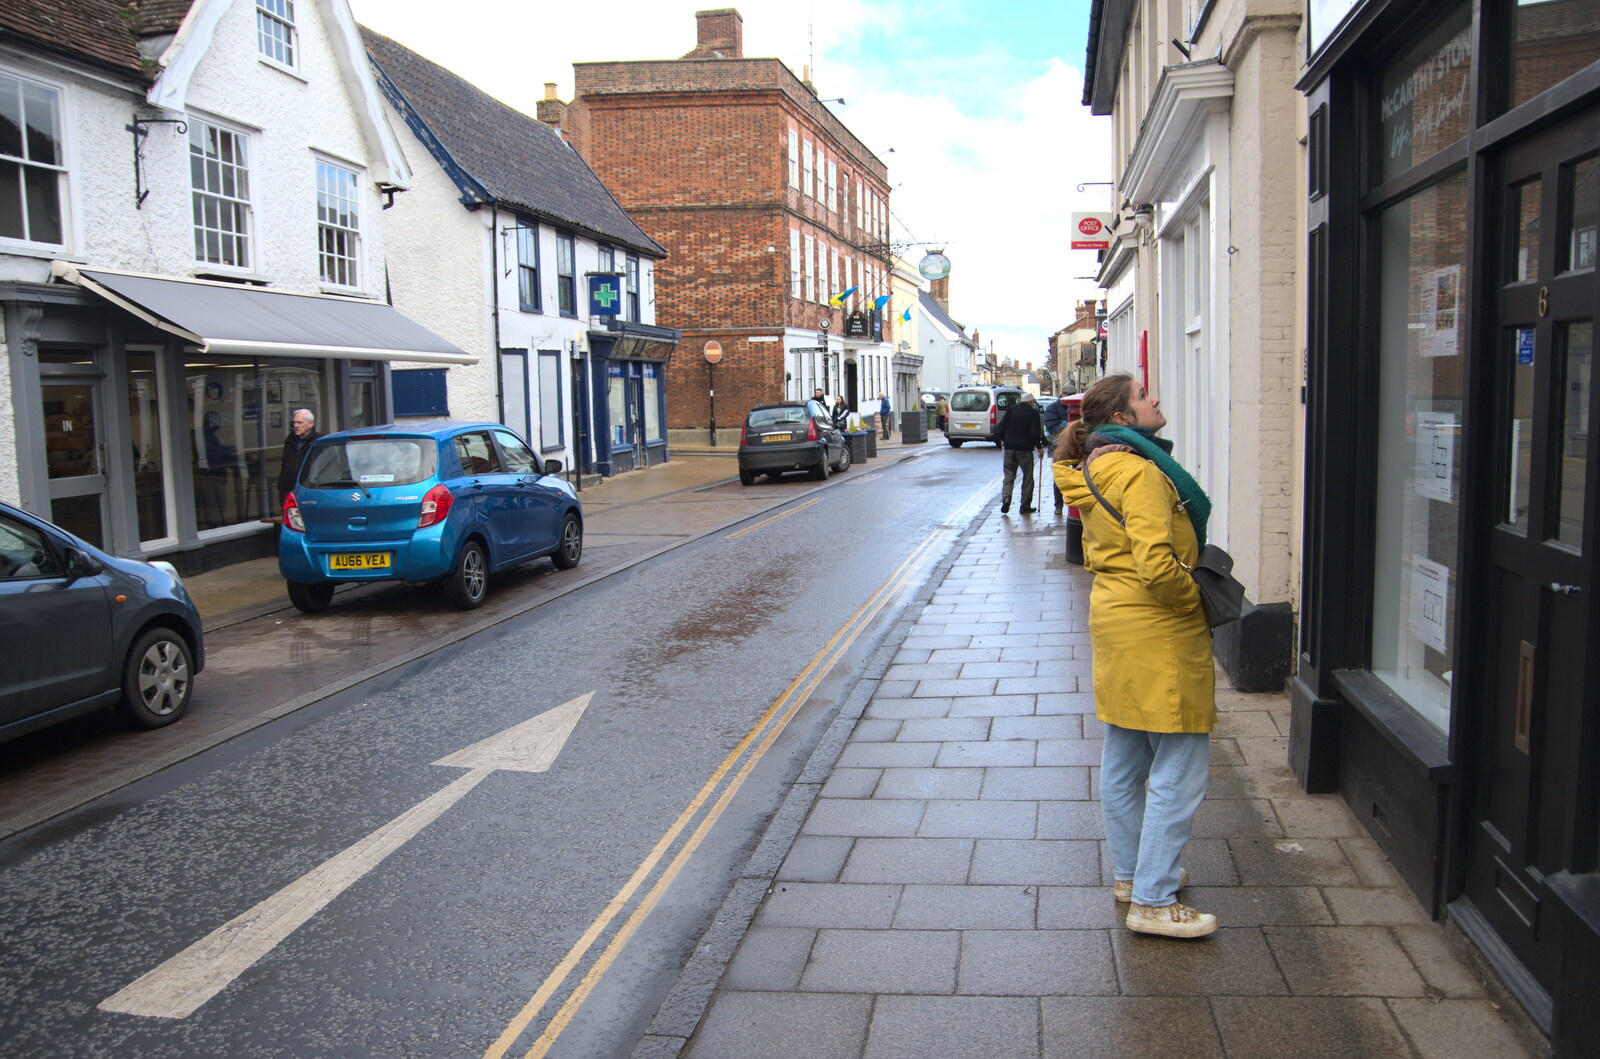 Lunch in Harleston, Norfolk - 1st March 2023: Isobel peers into a shop window